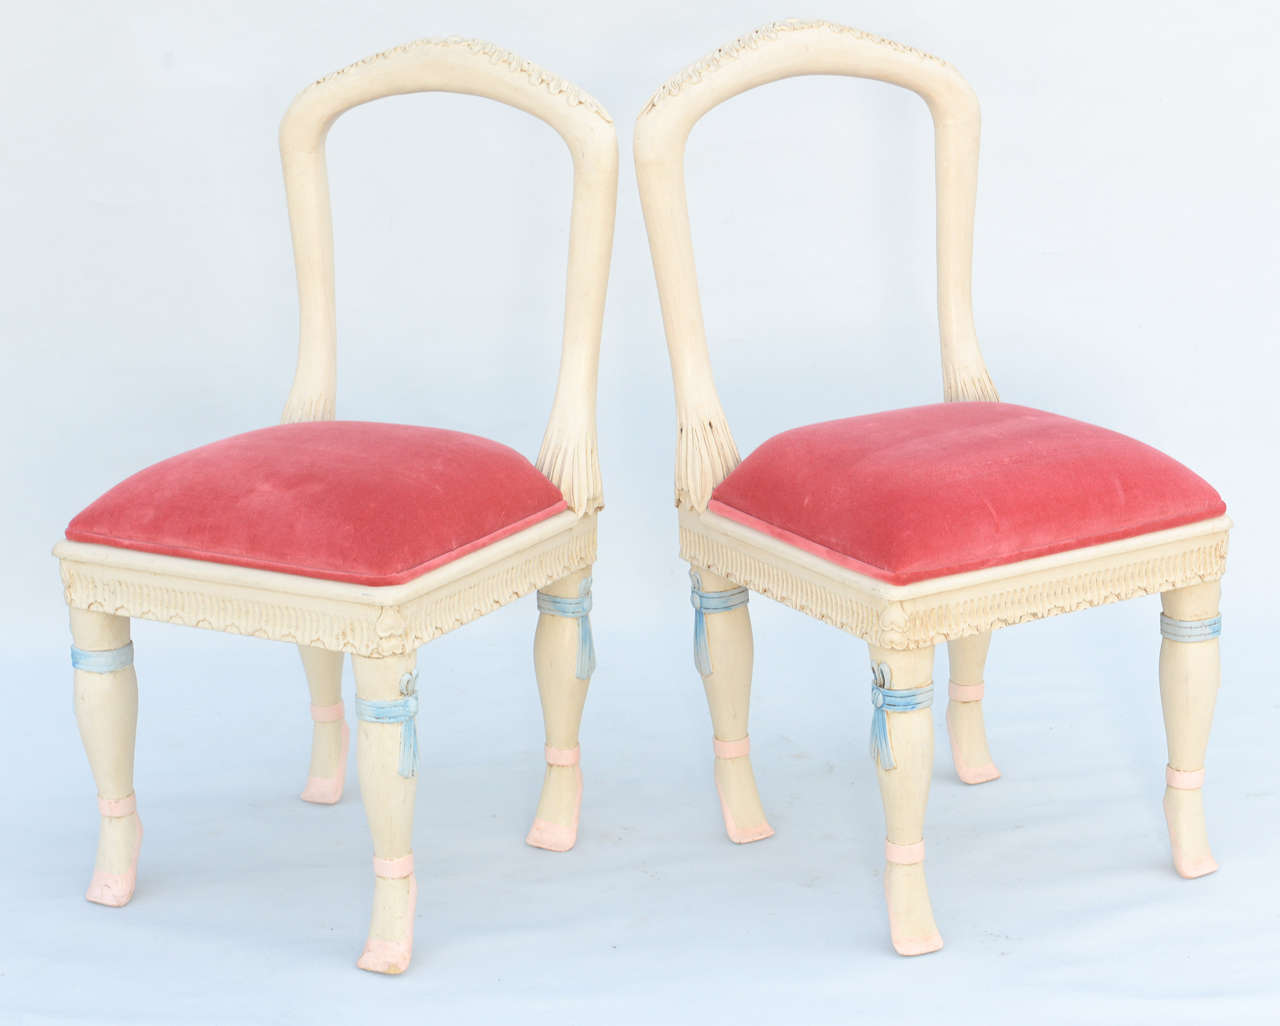 Set of four chairs, having painted finish showing natural wear, each having open arched back rests, drop-in crown seat on straight apron, raised on stylized cabriole legs carved with ribbons and ending in feet shaped as ballet slippers.

Stock ID: